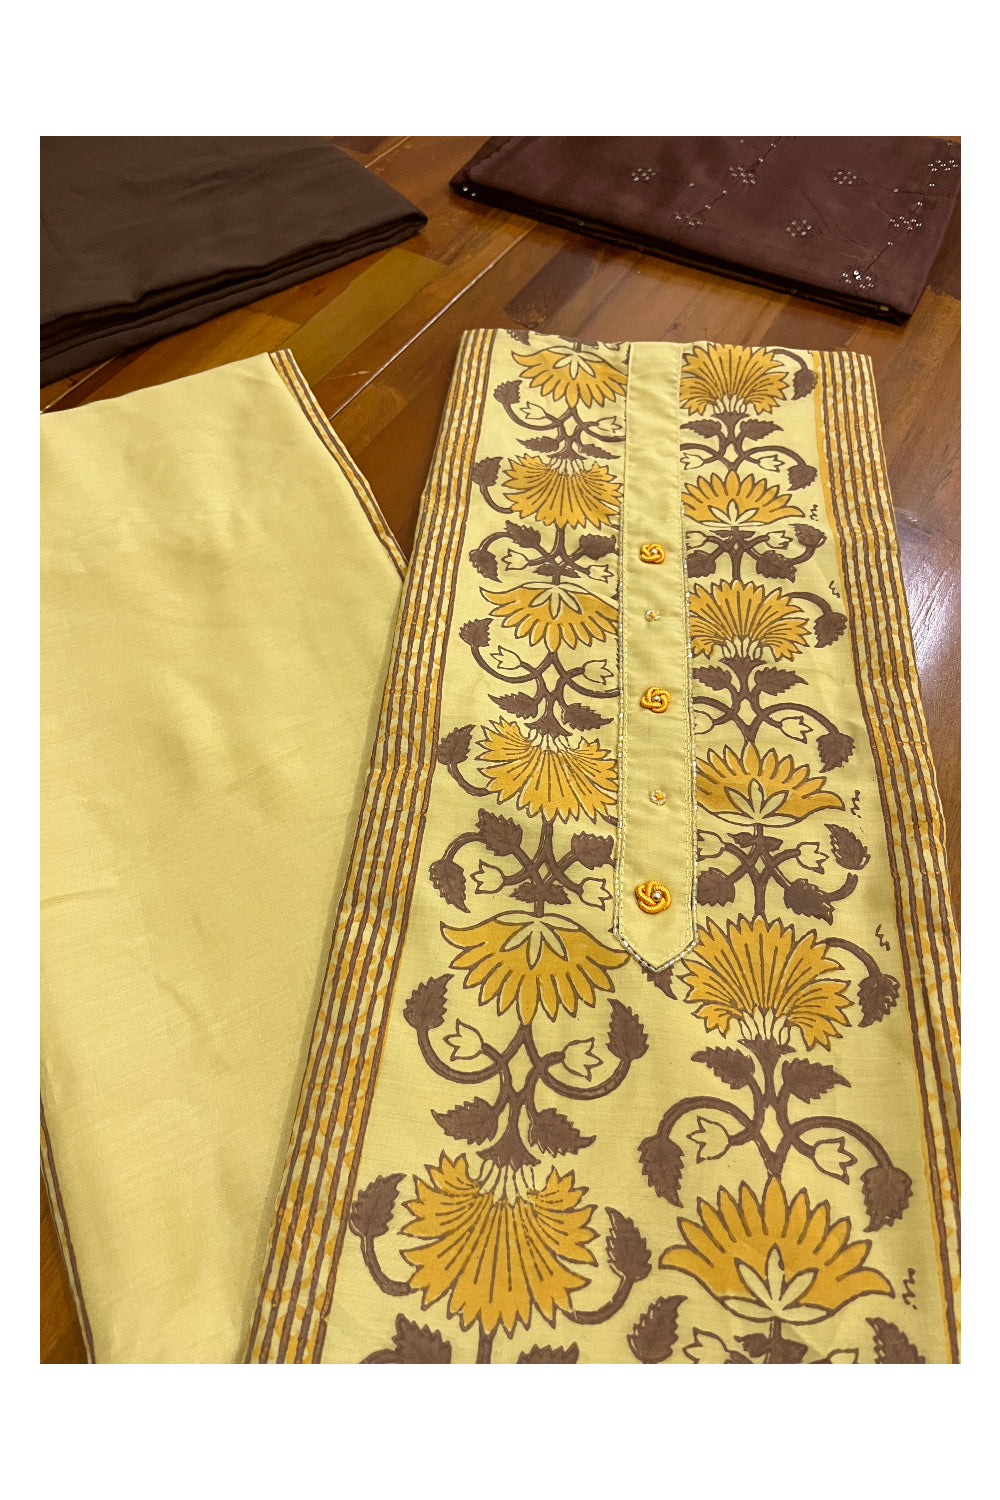 Southloom™ Cotton Churidar Salwar Suit Material in Yellow with Floral Prints